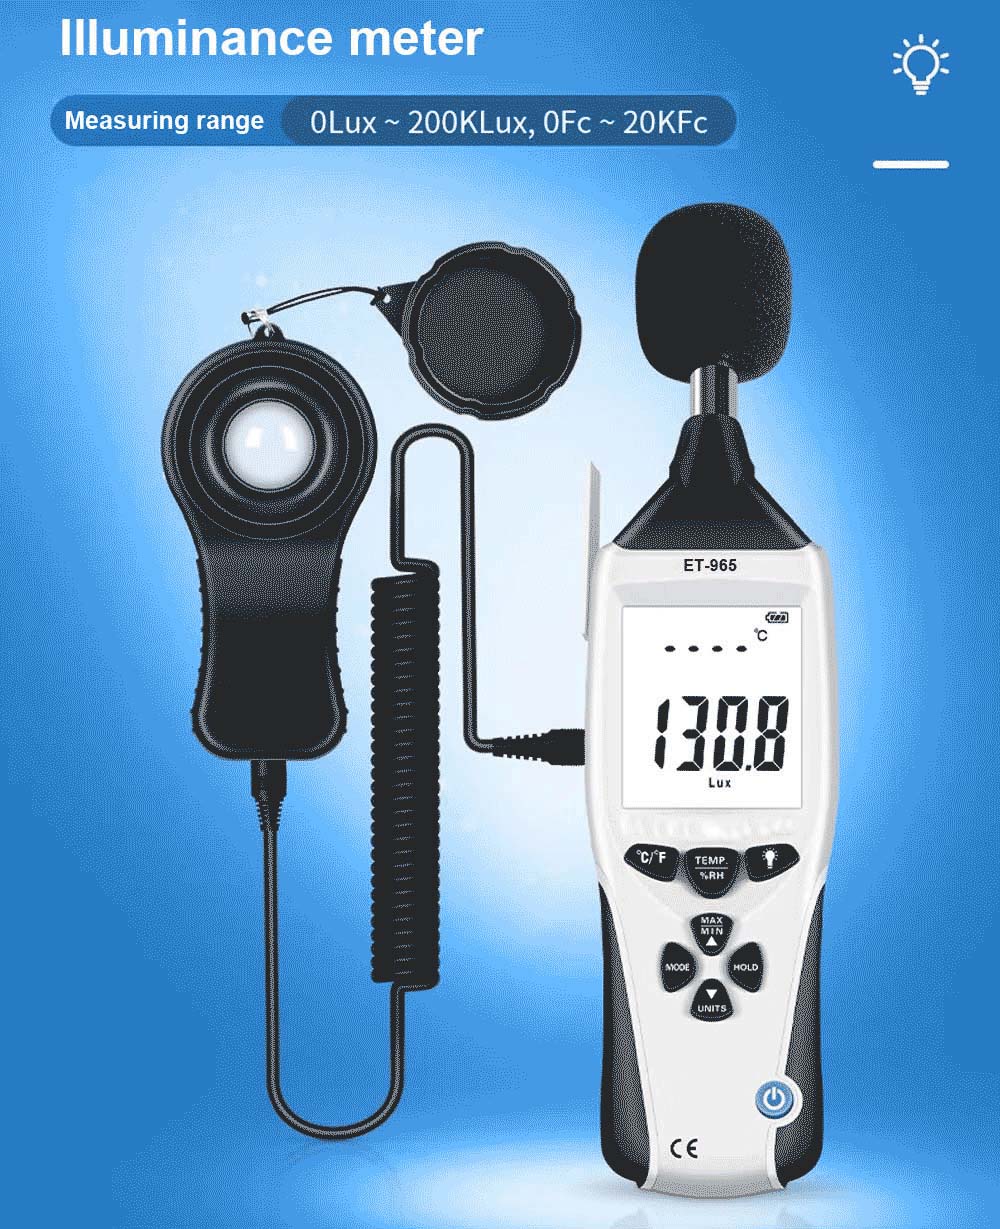 ET-965 5 in 1 Multifunction Environment Meter with Sound Level Meter, Light Meter, Humidity, and Temperature Fuction 4